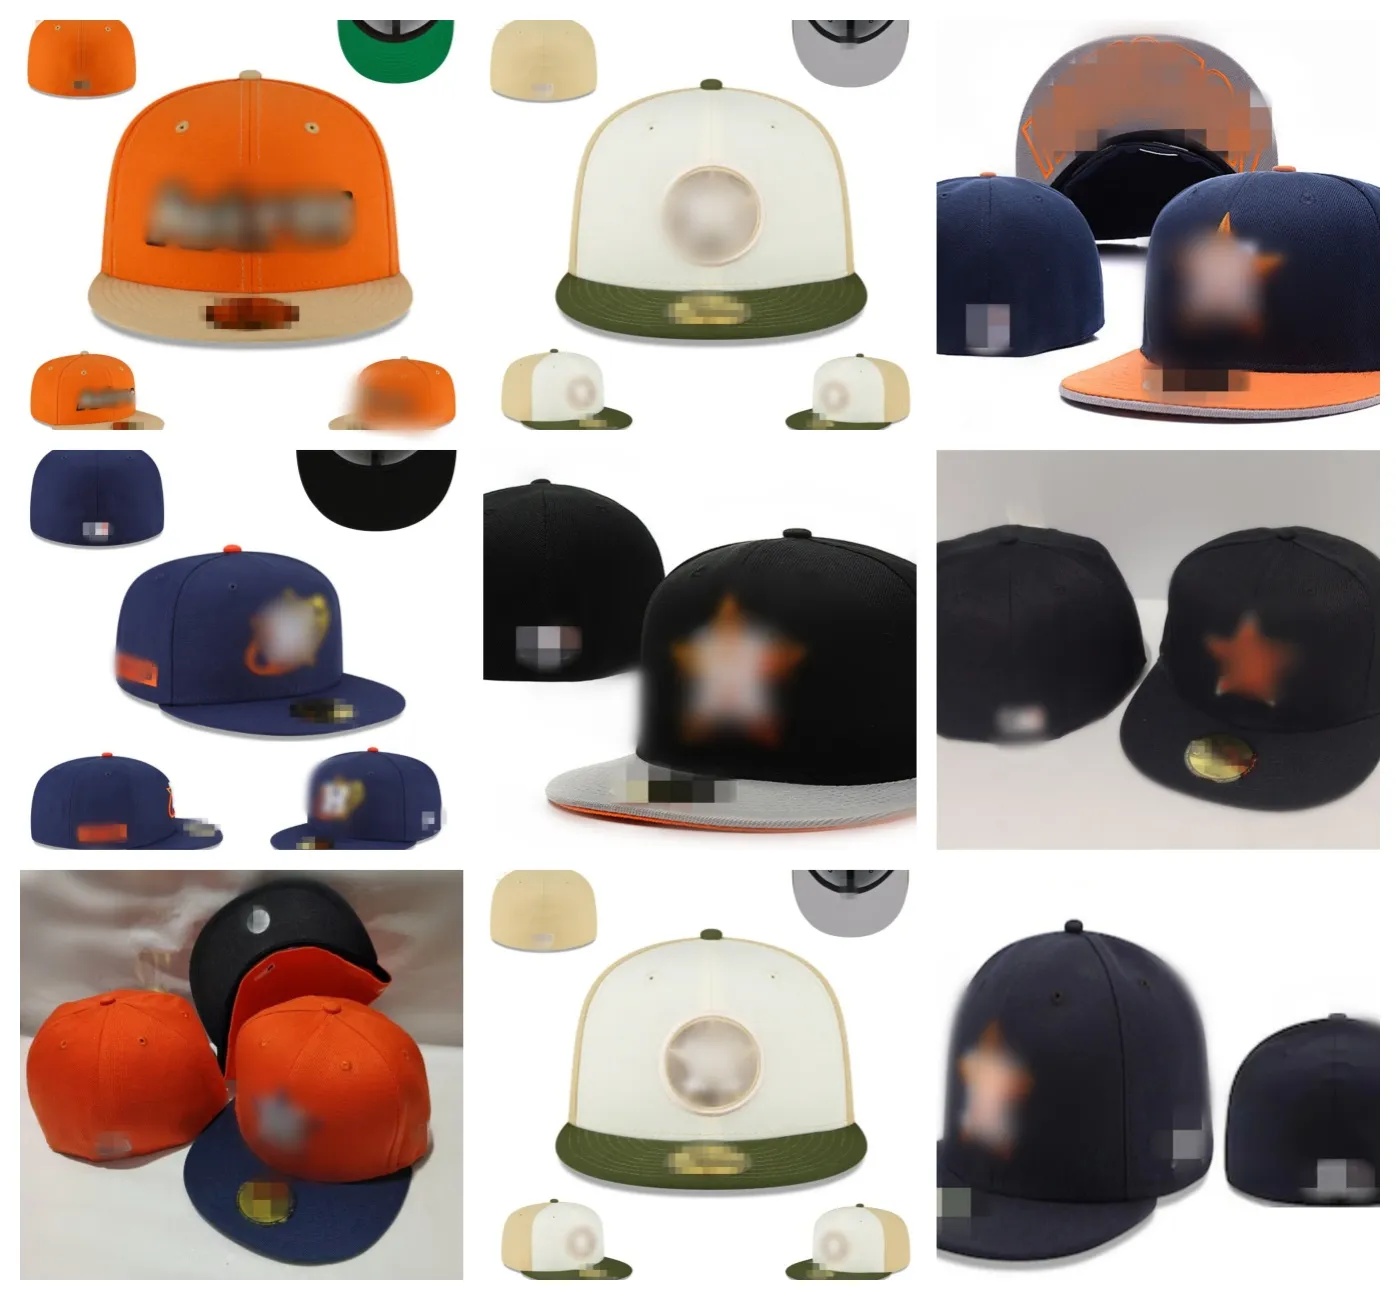 Men's Fitted Caps Houston H Hip Hop Size Hats Baseball Caps Adult Flat PeakFor Men Women Full Closed a1